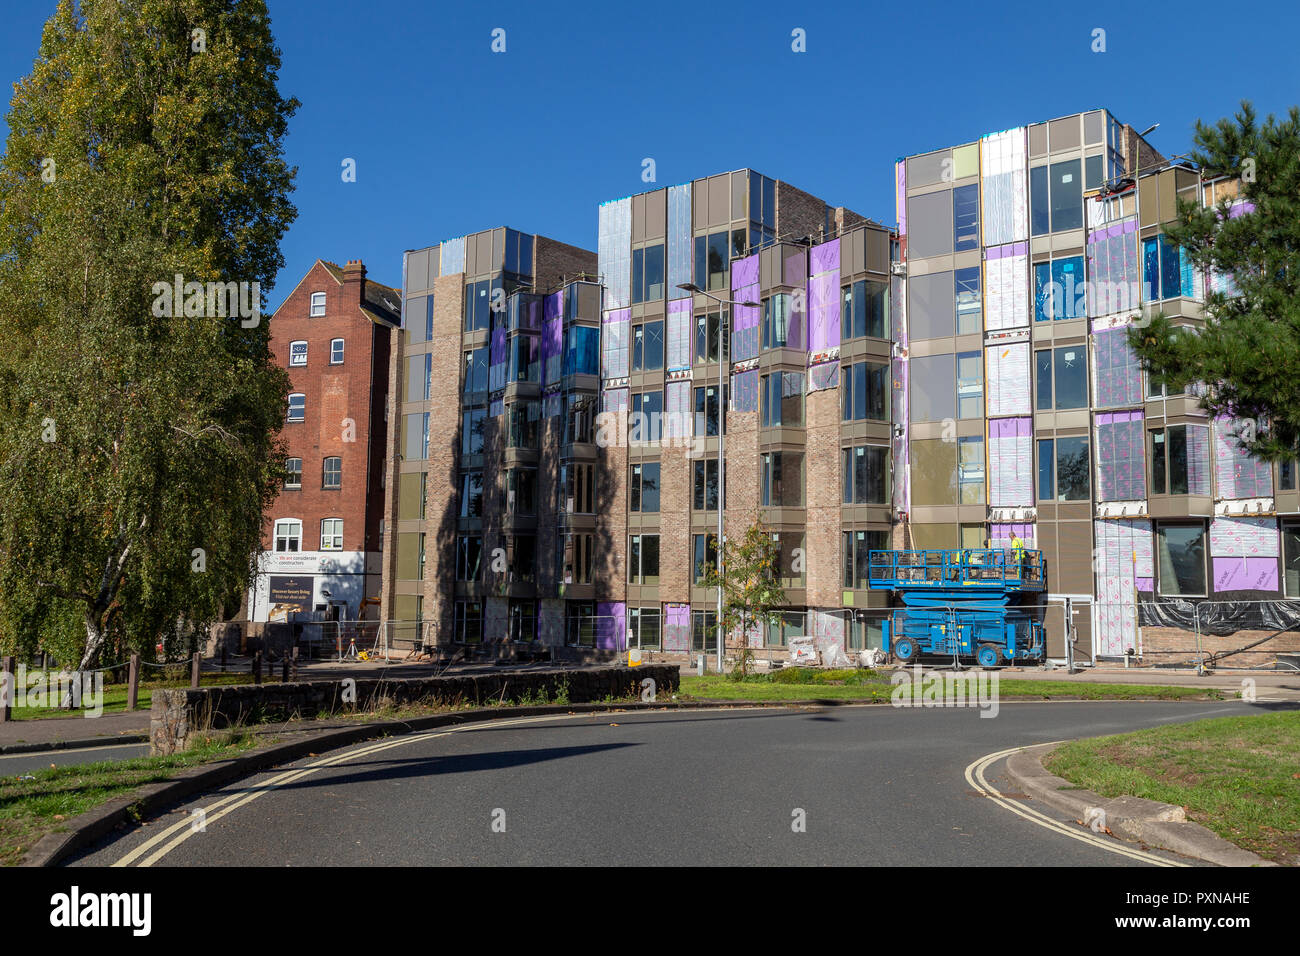 Student accommodation, Student accommodation exeter,housing, lodging, lodgings, living quarters, quarters, rooms, chambers,Collegiate West Gate Stock Photo